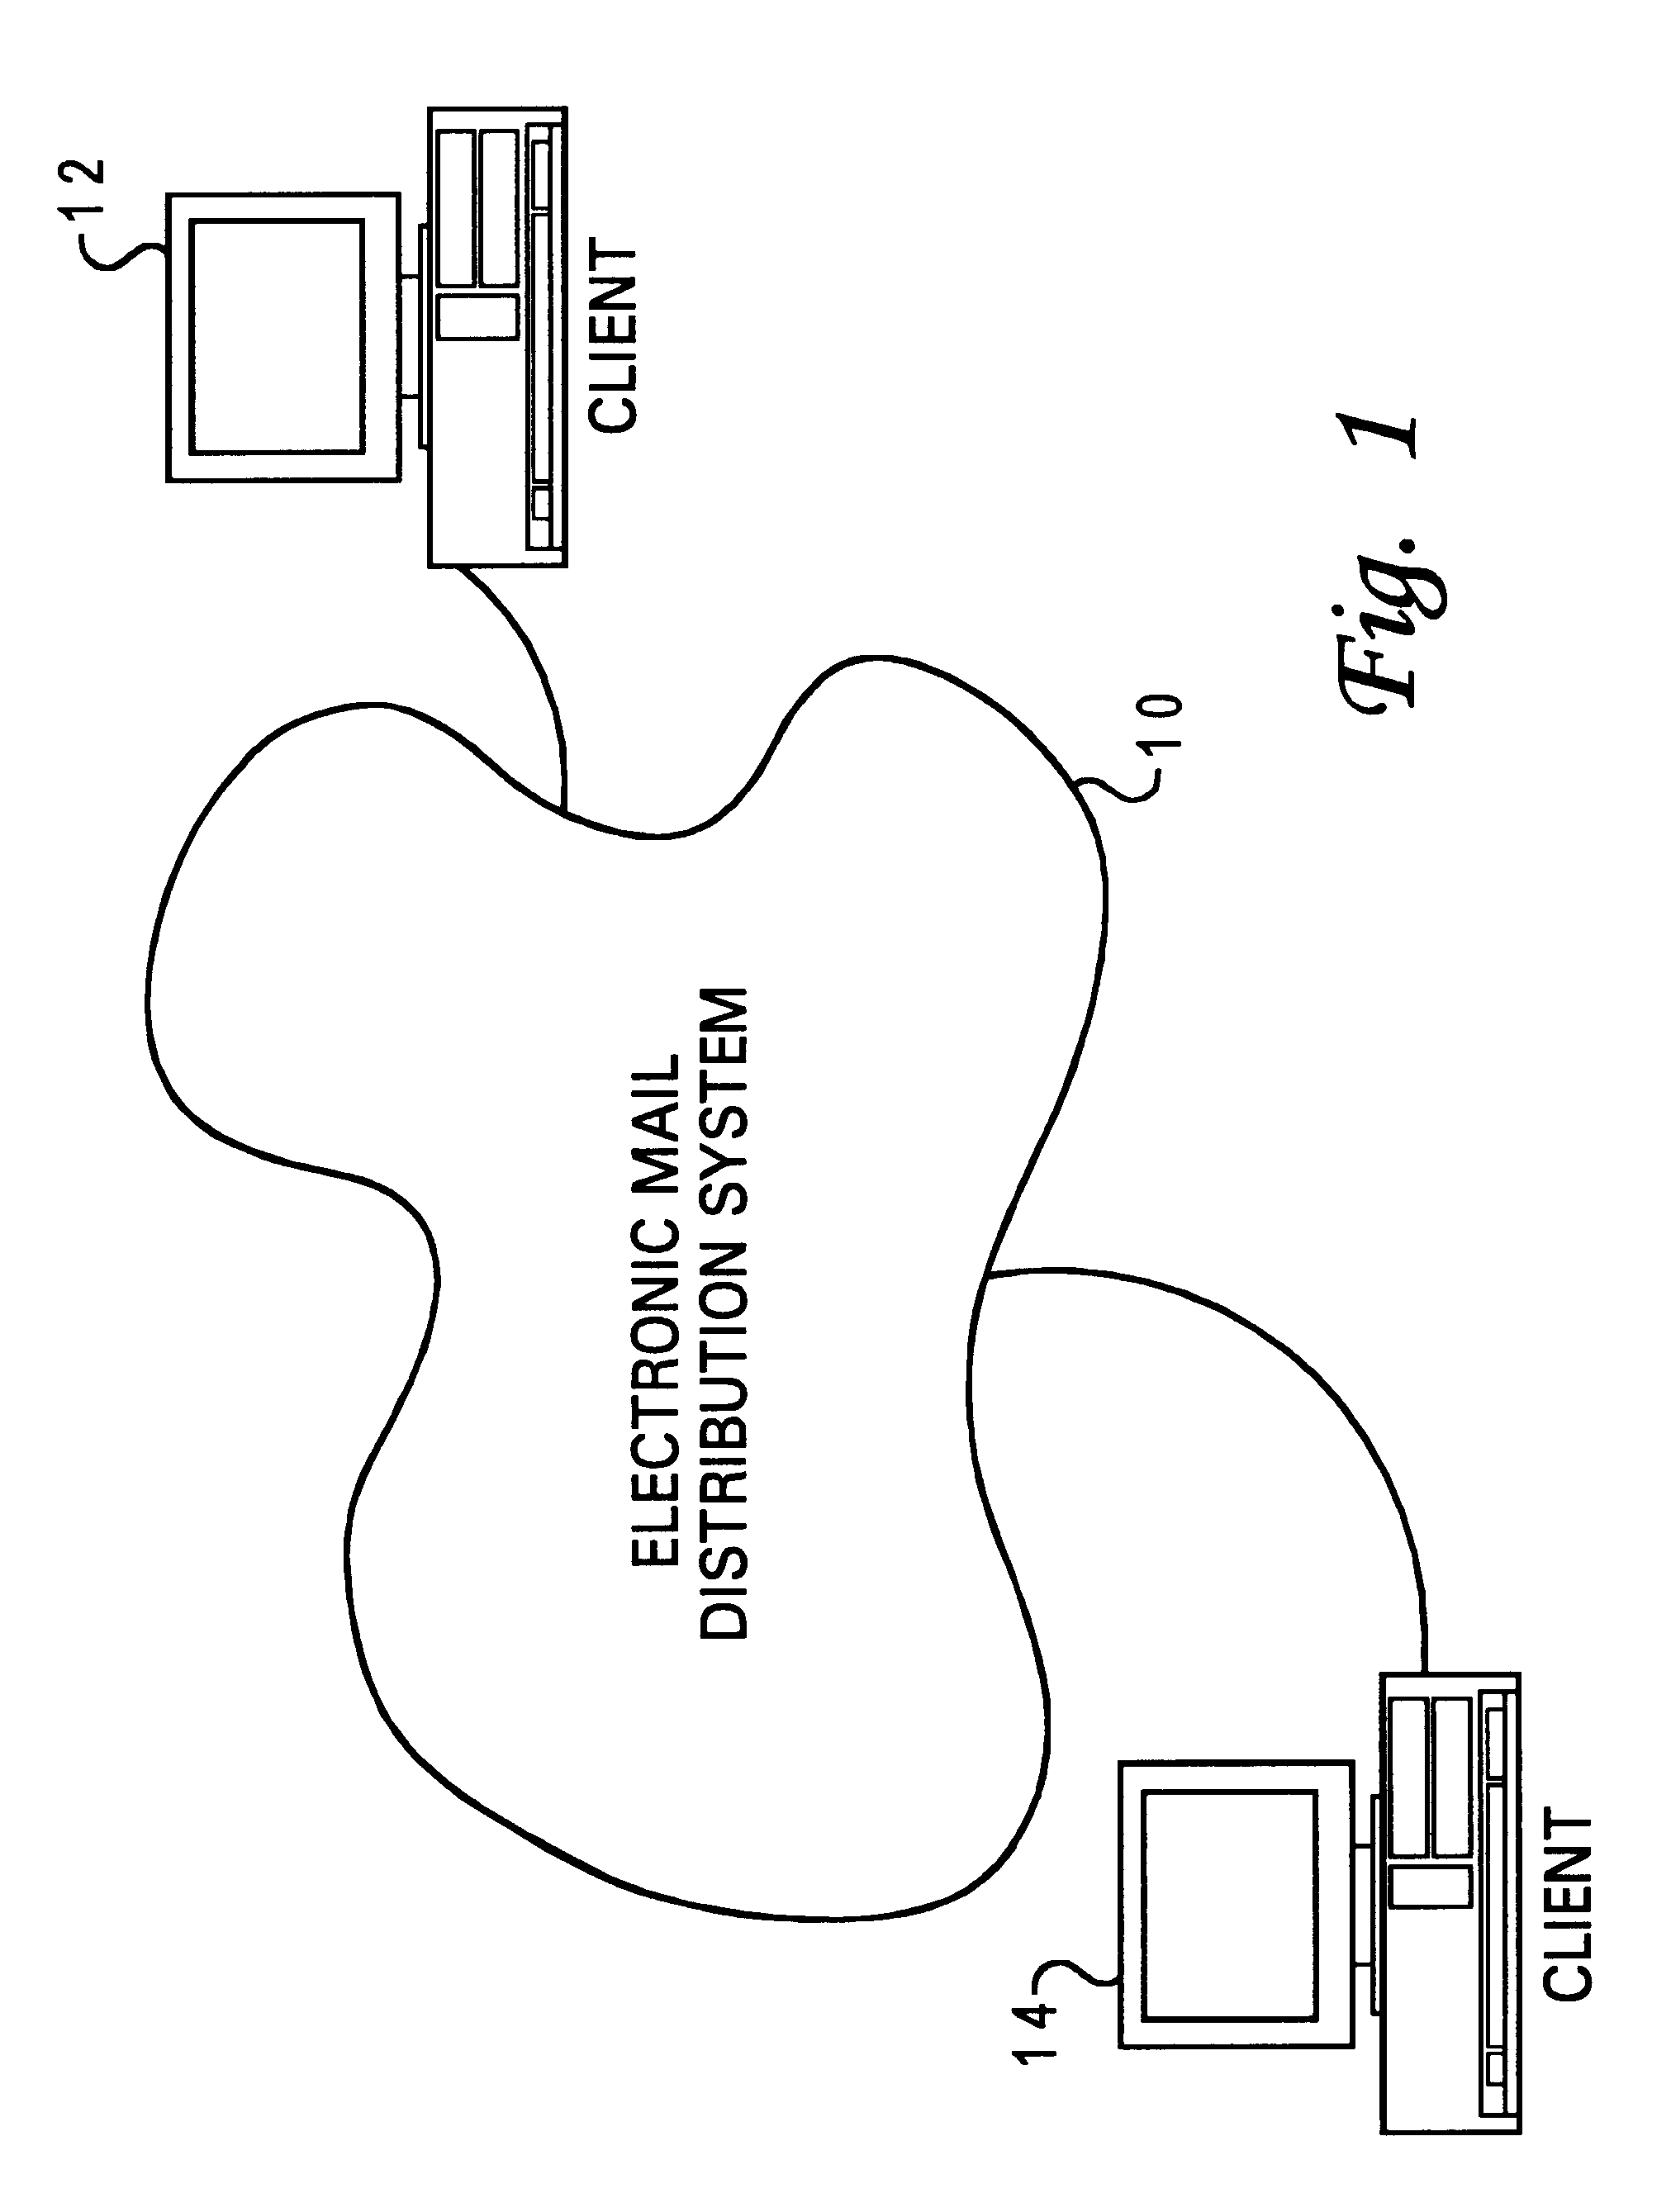 Method and system for automatic electronic mail address maintenance